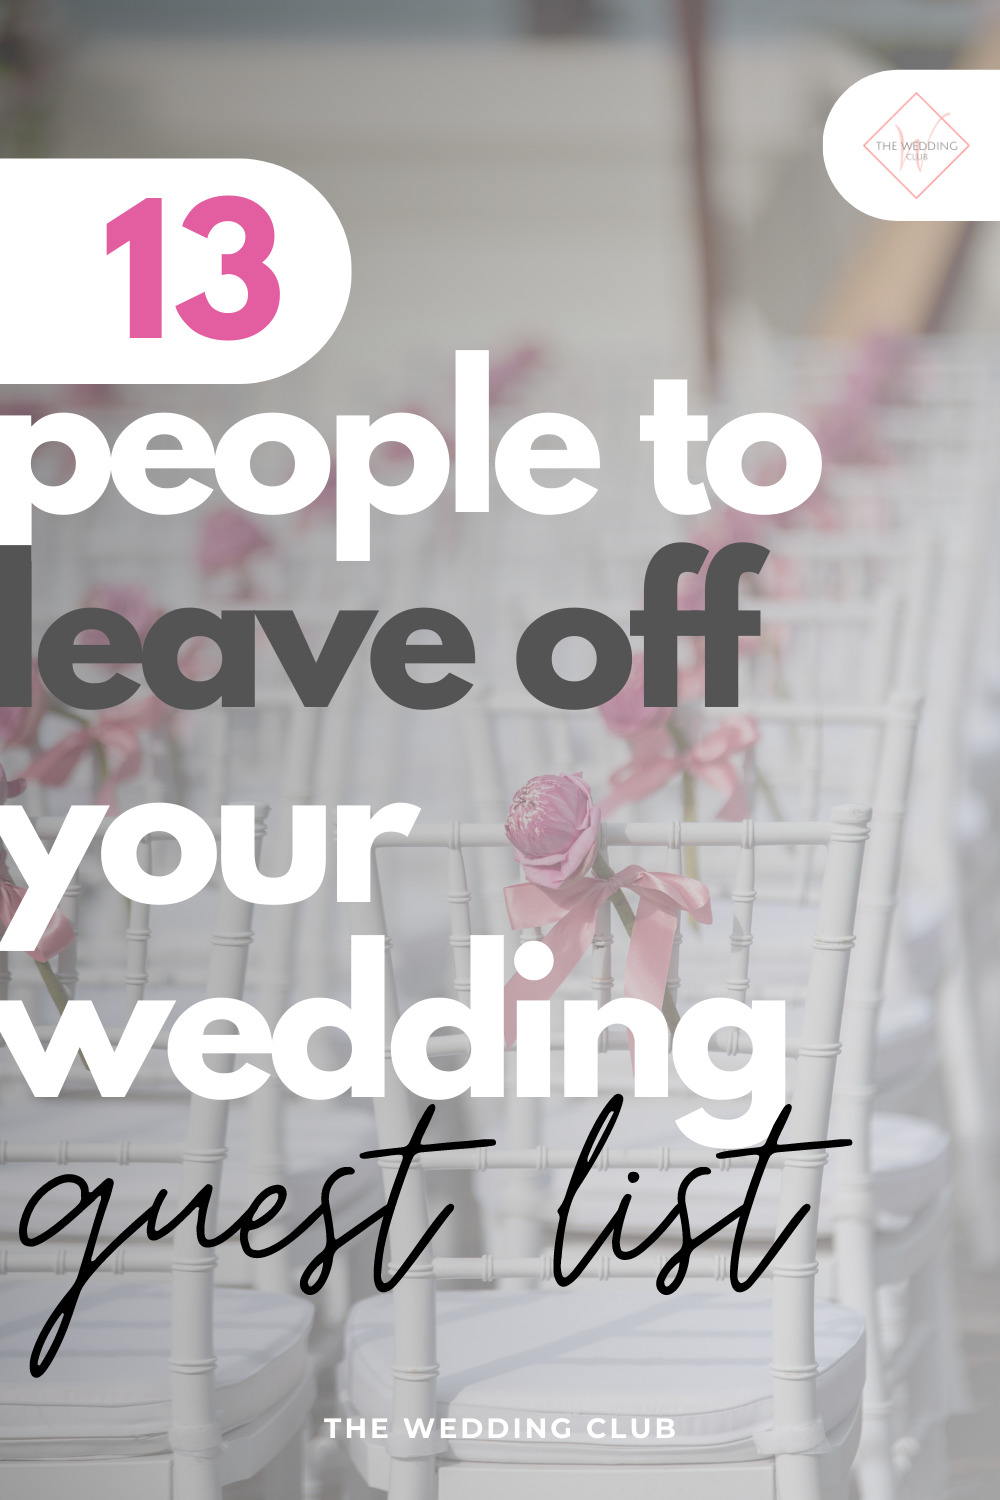 13 People to leave off your wedding guest list